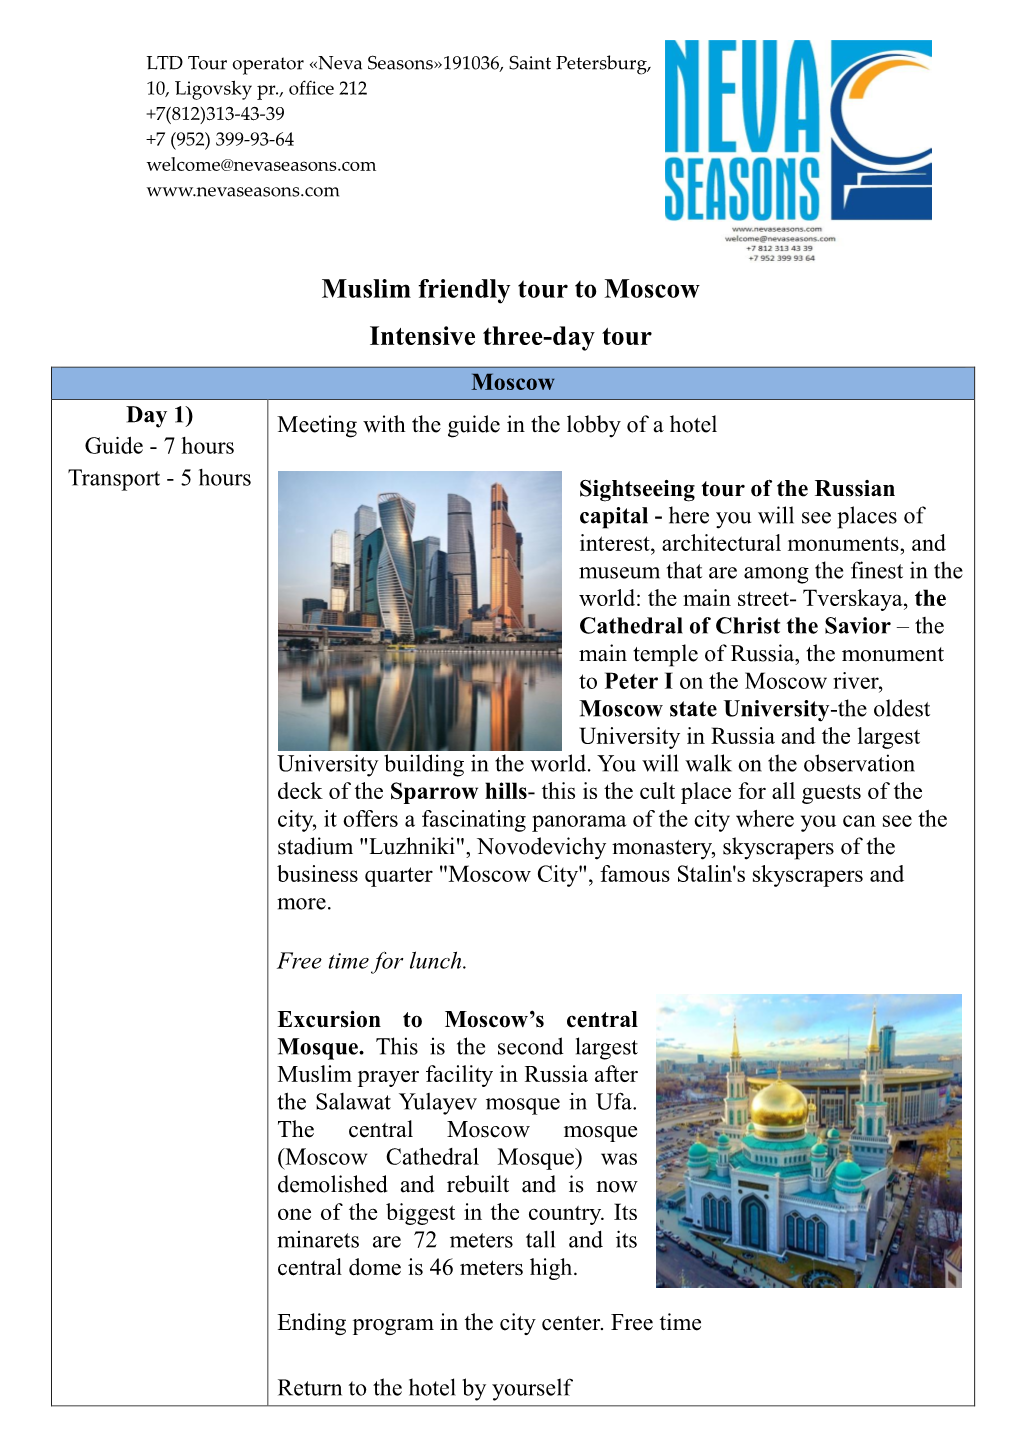 Muslim Friendly Tour to Moscow Intensive Three-Day Tour